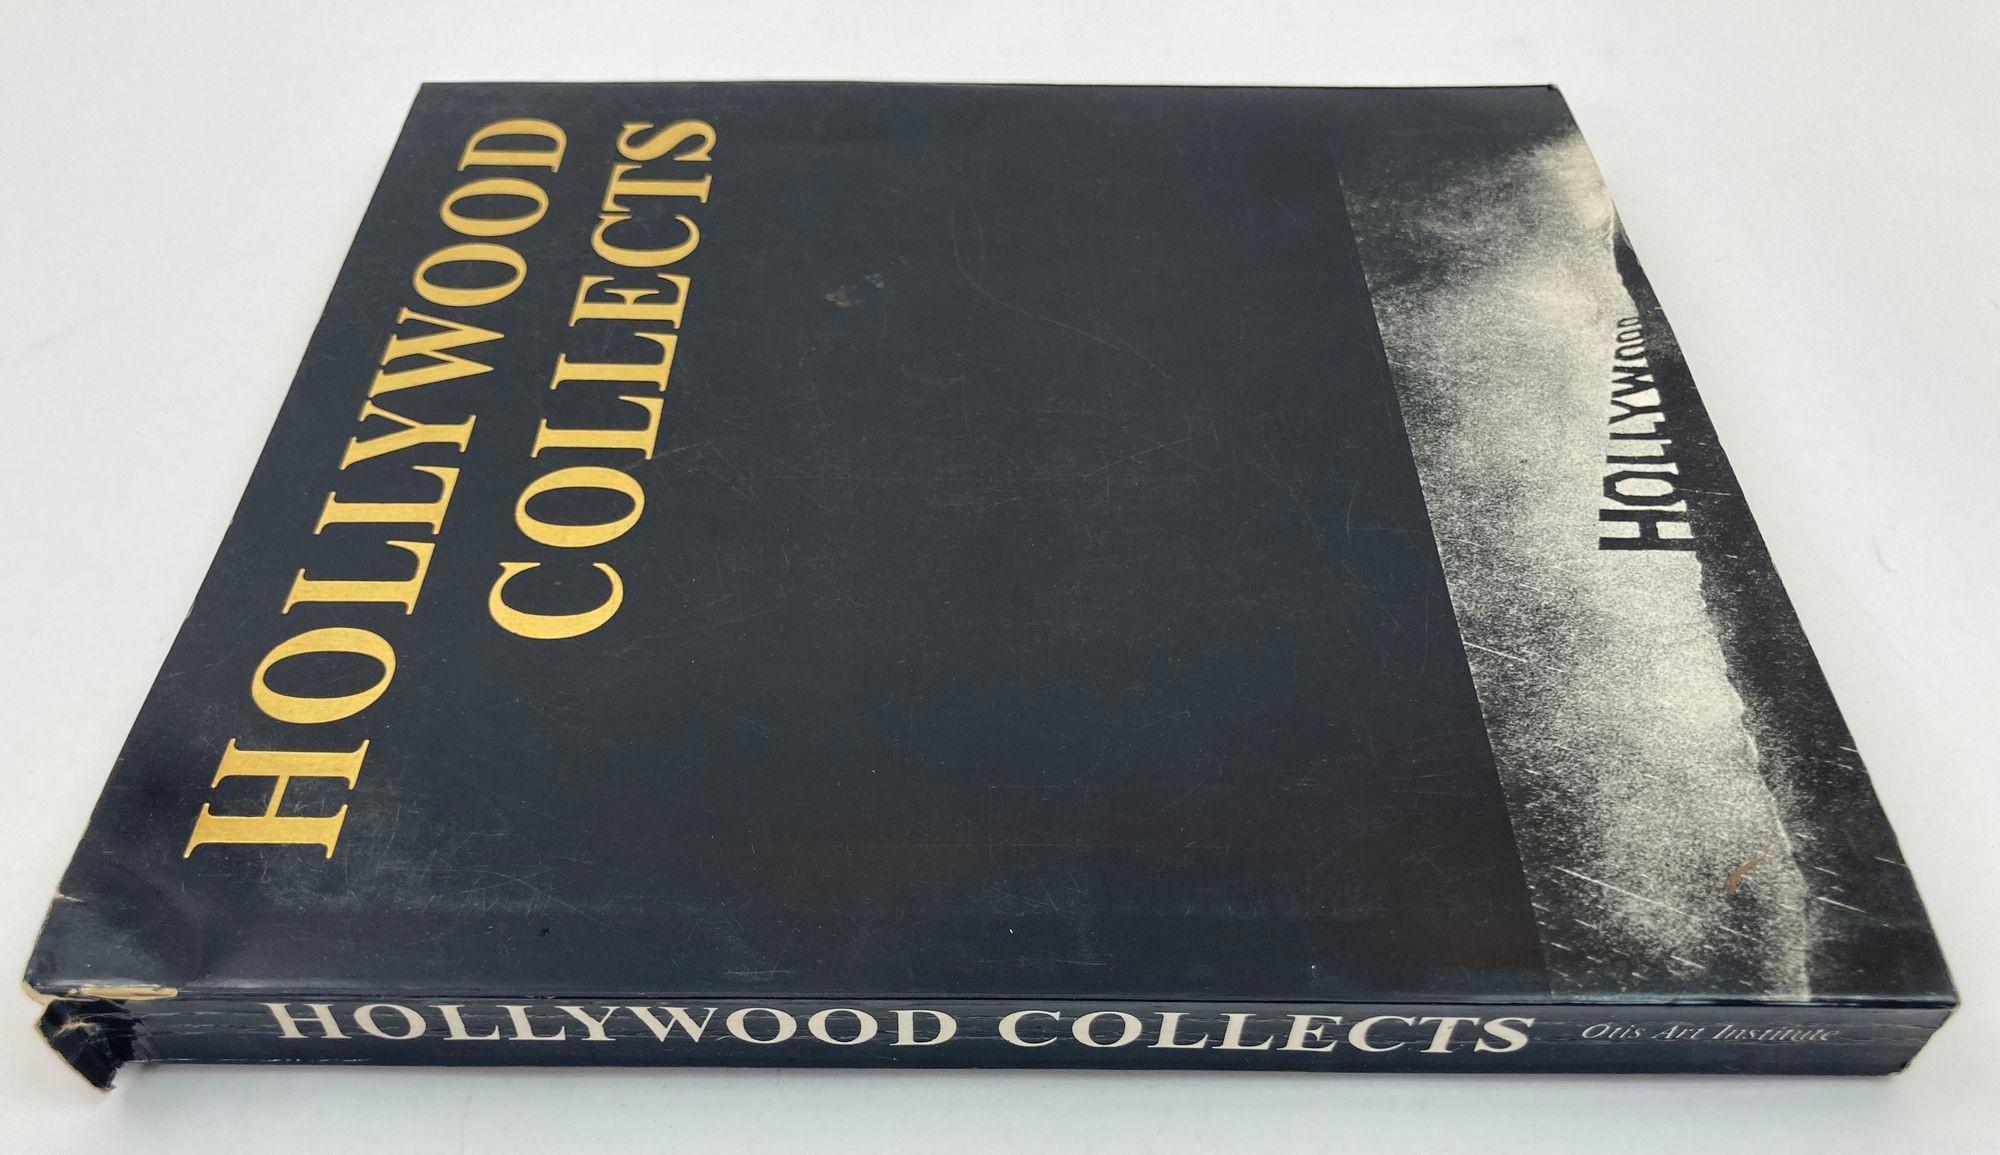 Hollywood Regency Hollywood Collects An Exhibition from April 5 to May 15 1970 by Henry J. Seldis For Sale